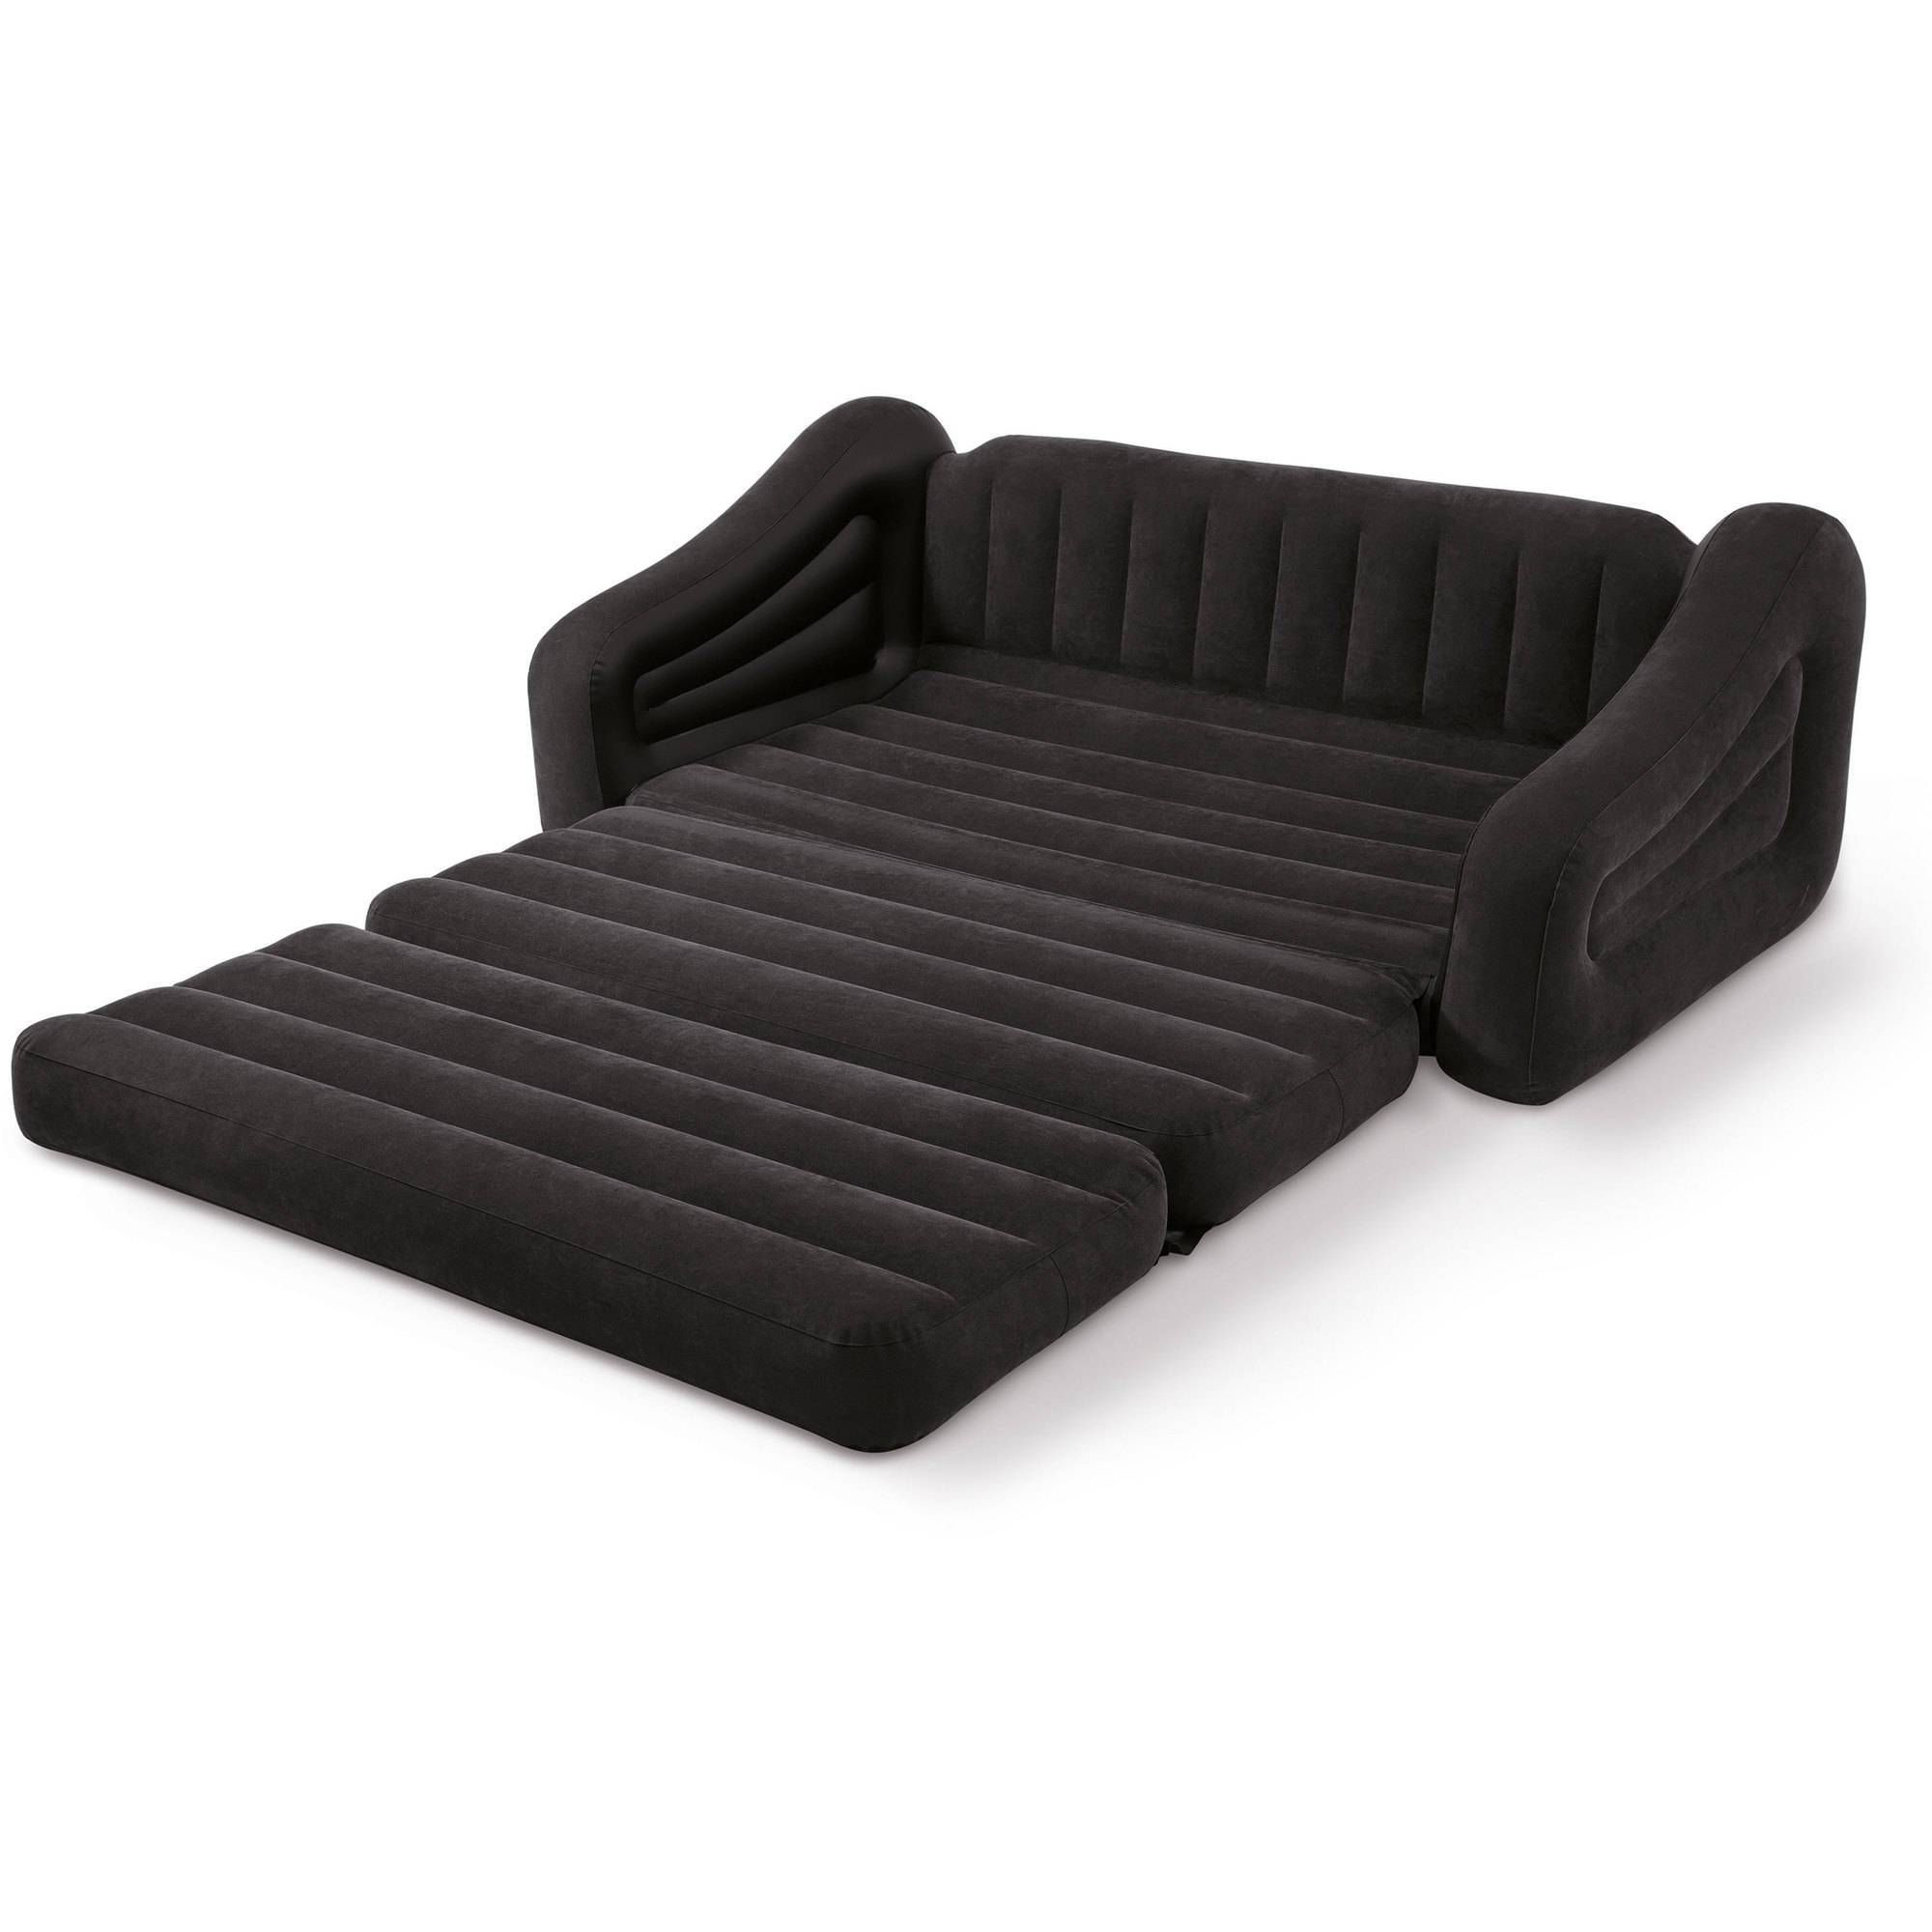 Intex Queen Inflatable Pull Out Sofa Bed Walmart For Intex Air Sofa Beds 